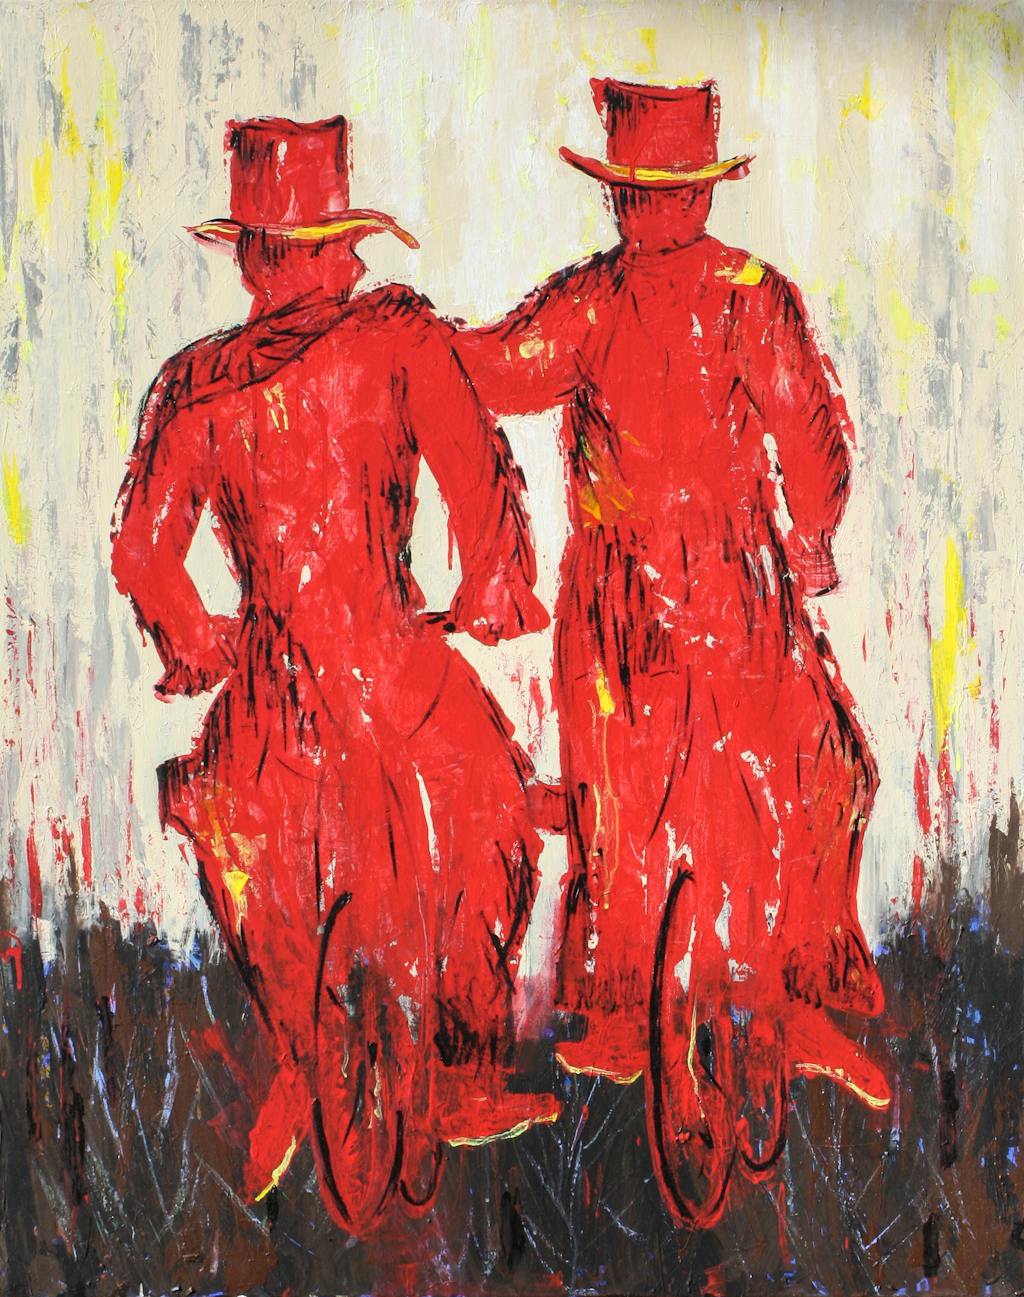 Painting "Bicycle Riders", painted by Elena Birkenwald in 2007